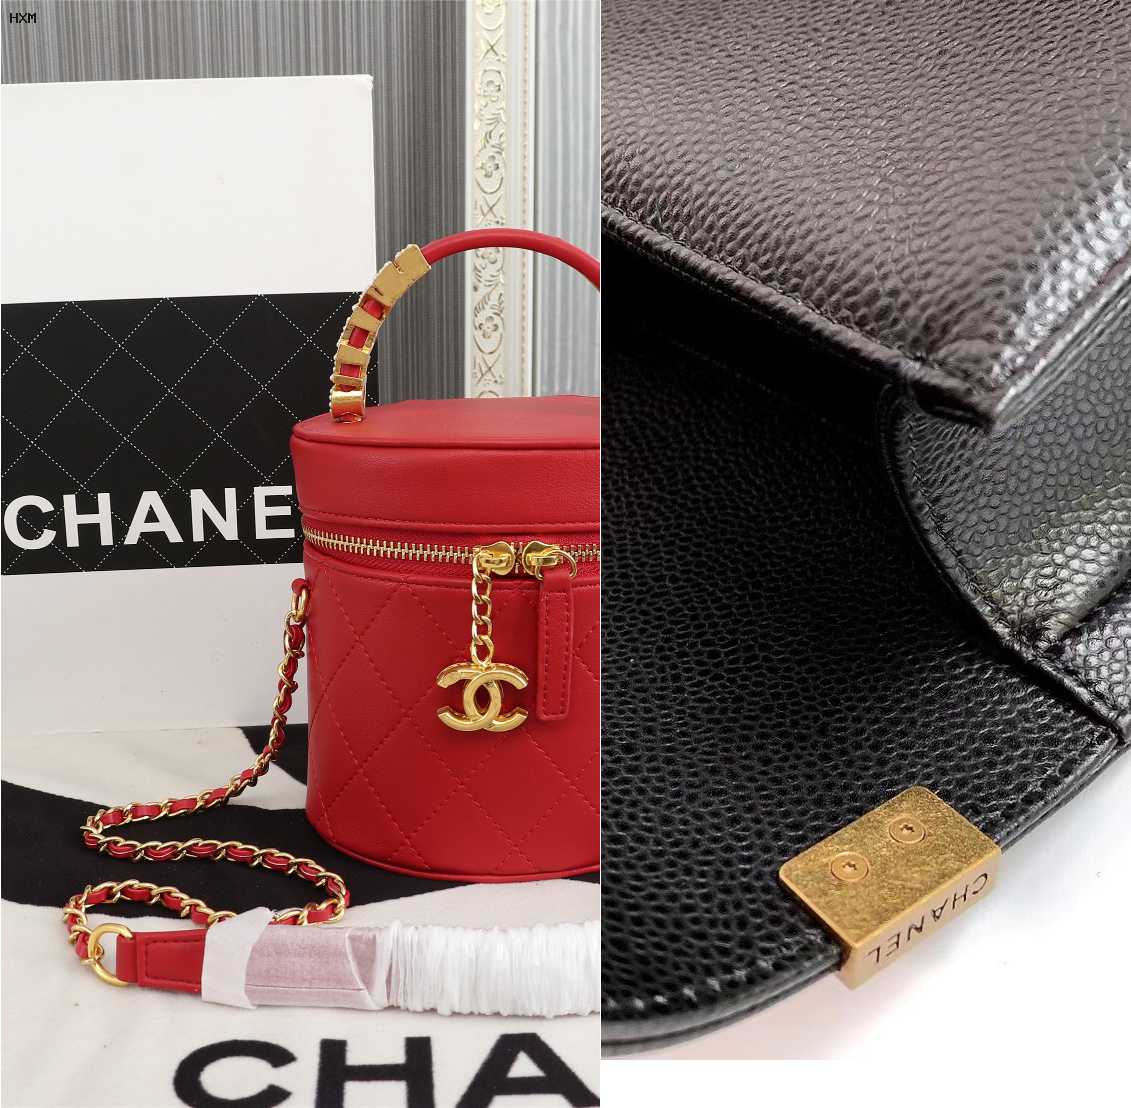 sac chanel couleur or